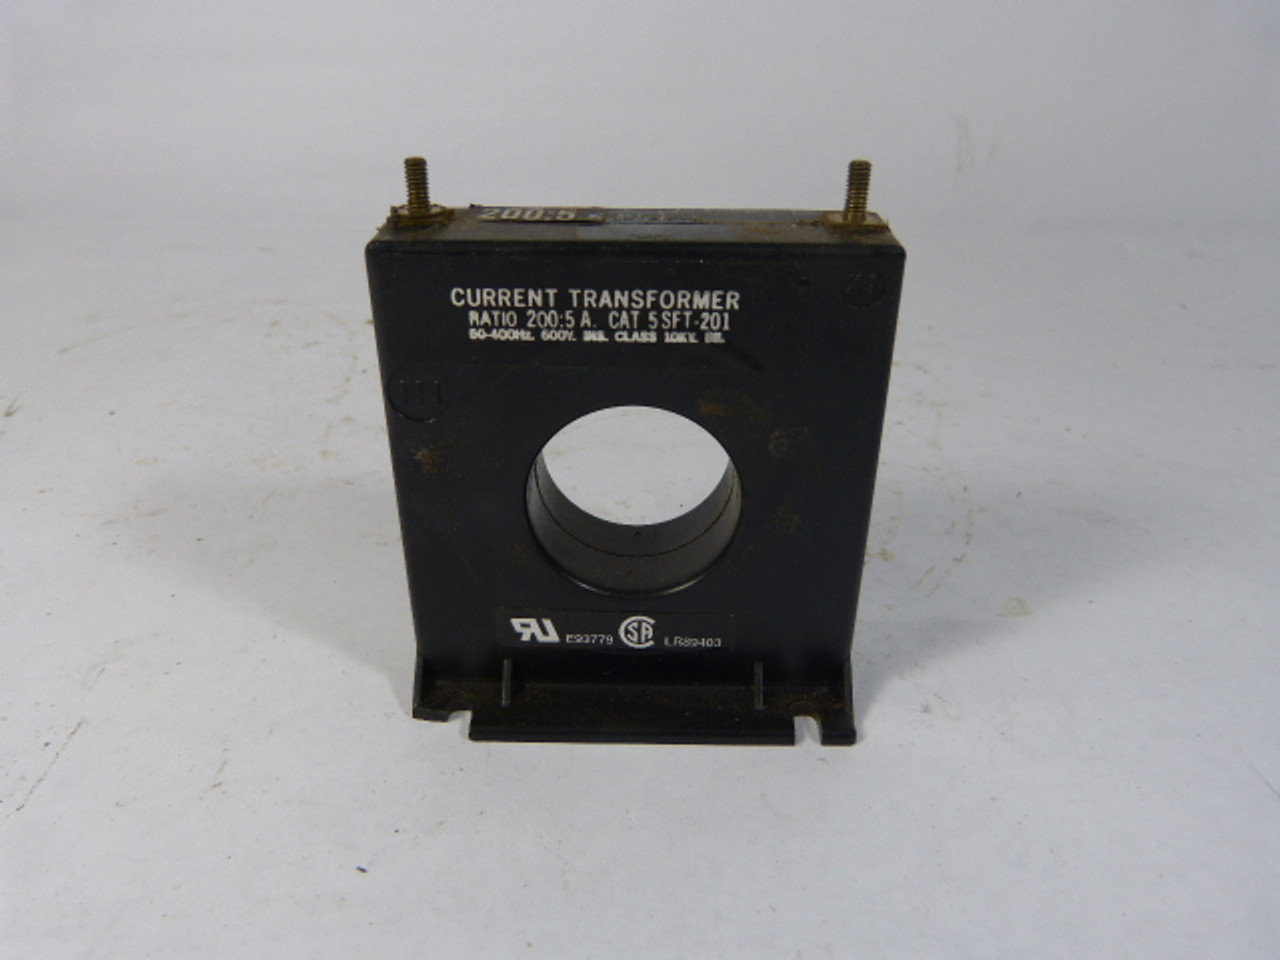 Electro-Meters 5SFT-201 Current Transformer 200:5 Ratio USED